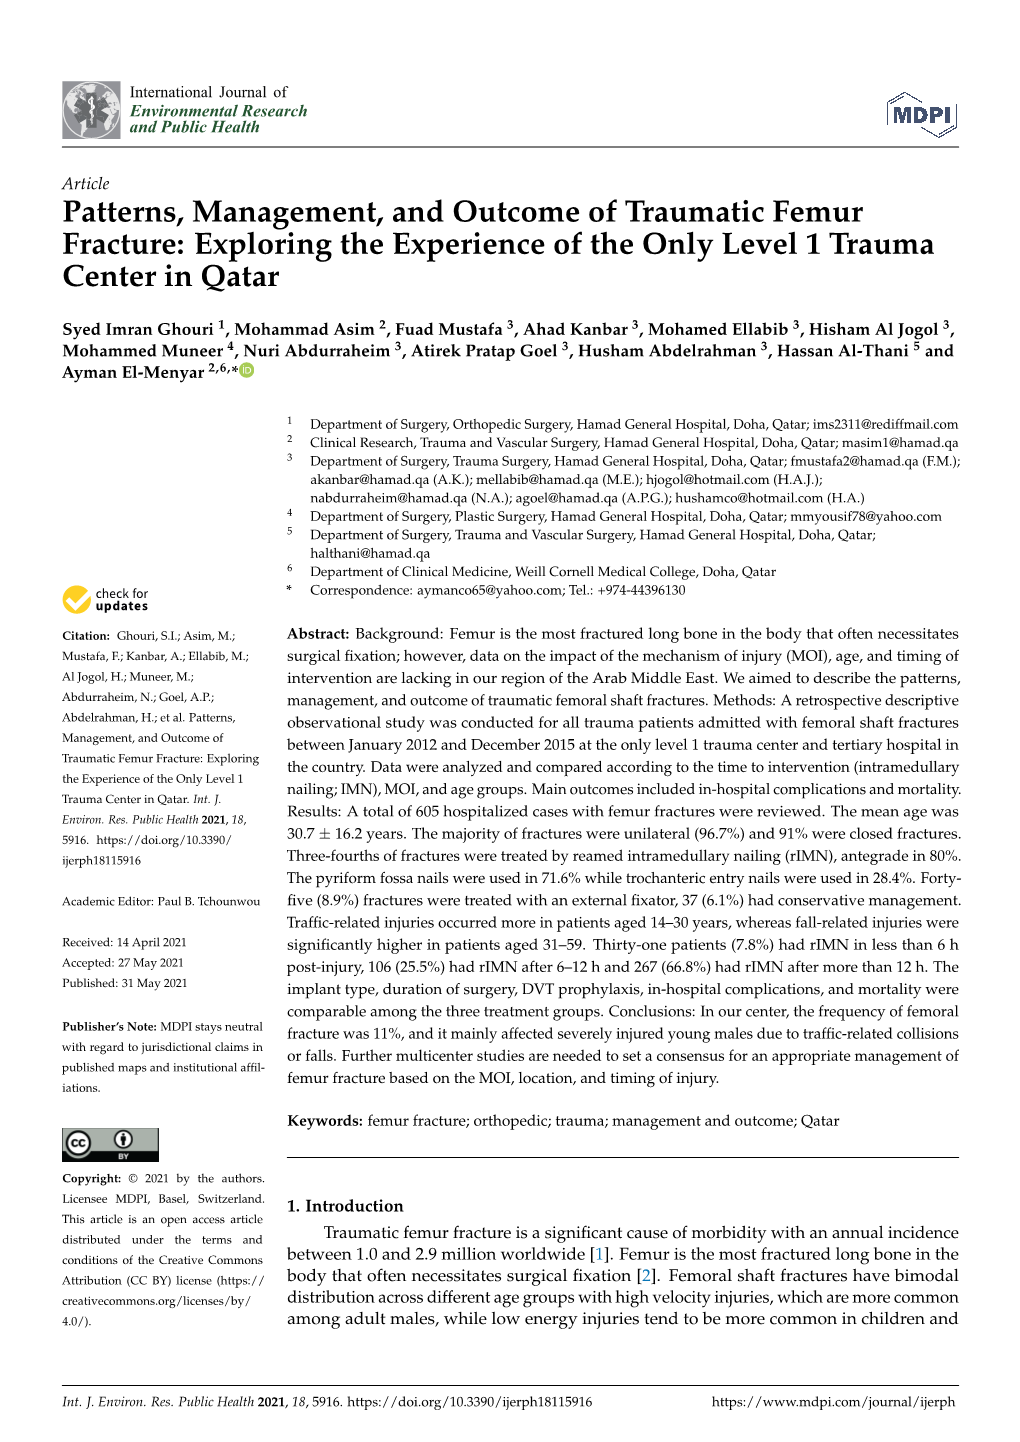 Patterns, Management, and Outcome of Traumatic Femur Fracture: Exploring the Experience of the Only Level 1 Trauma Center in Qatar